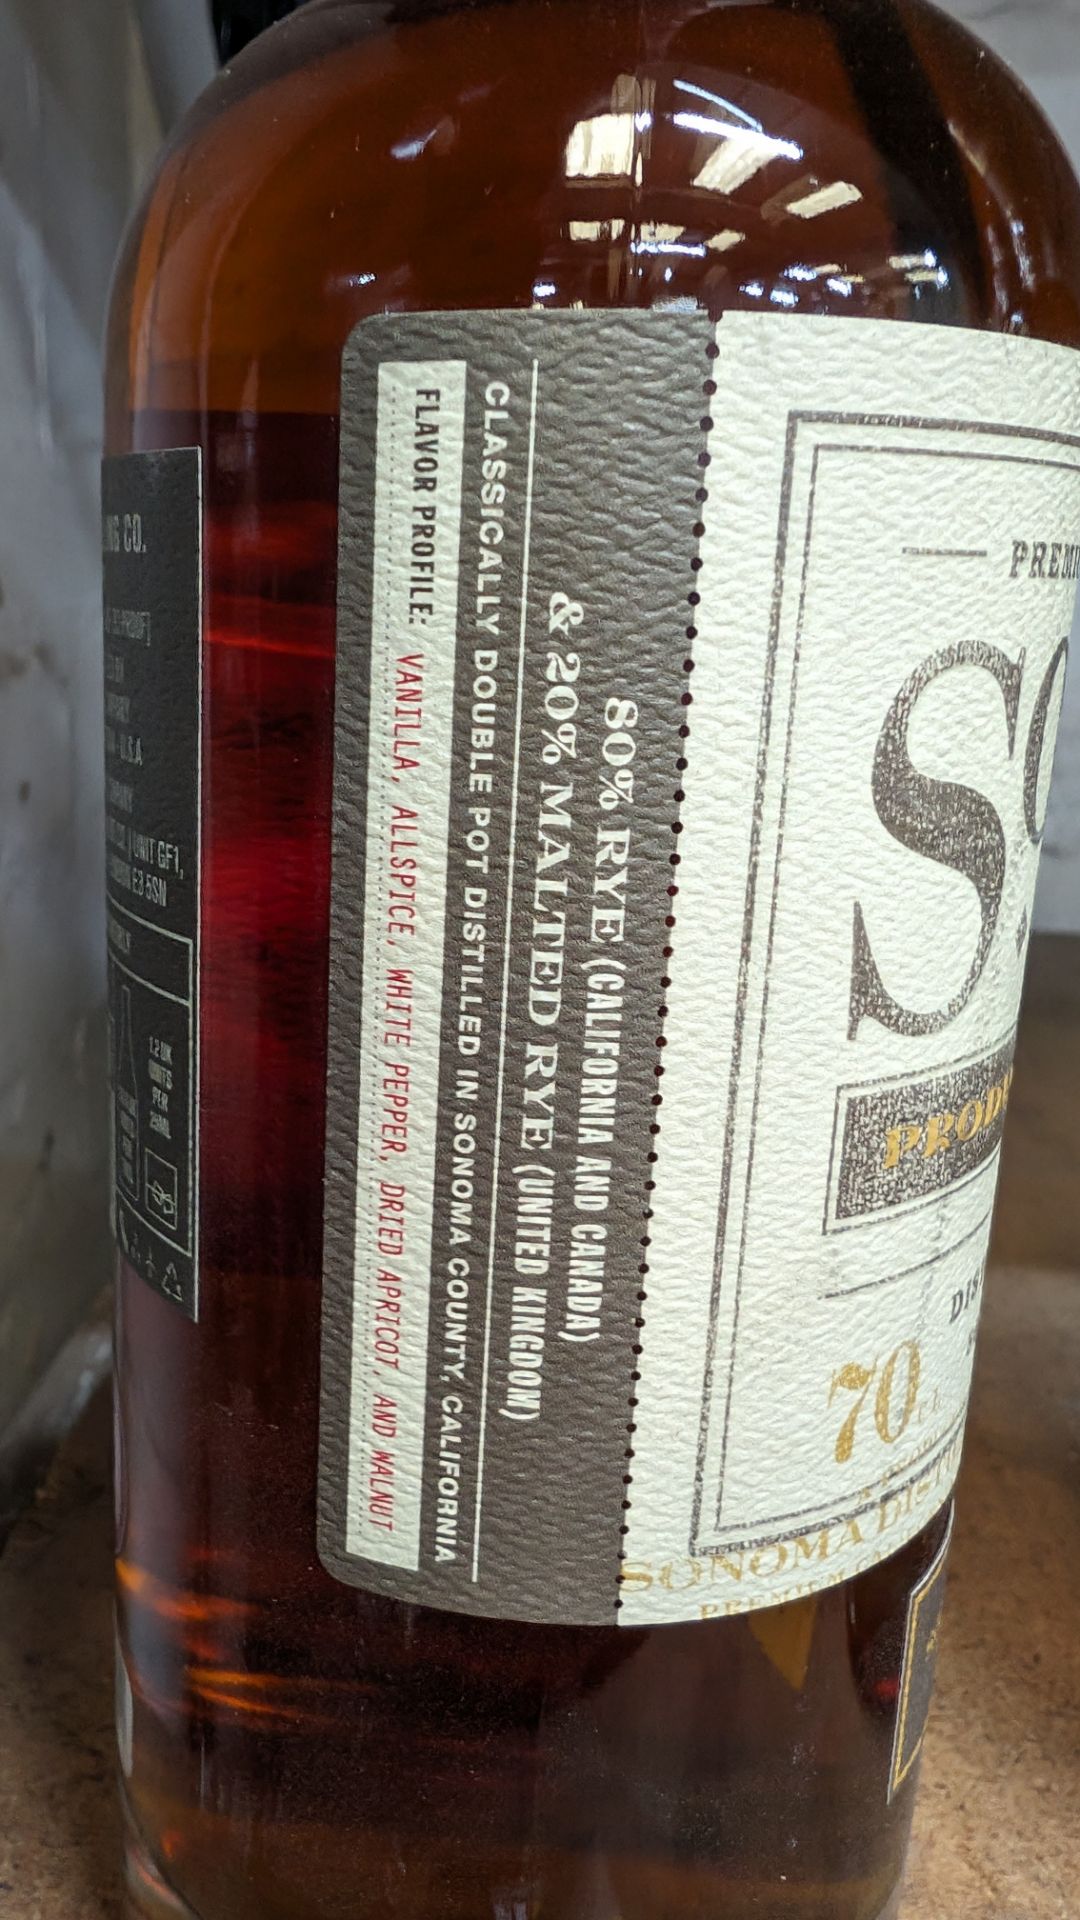 1 off 700ml bottle of Sonoma Rye Whiskey. 46.5% alc/vol (93 proof). Distilled and bottled in Sonom - Image 7 of 8